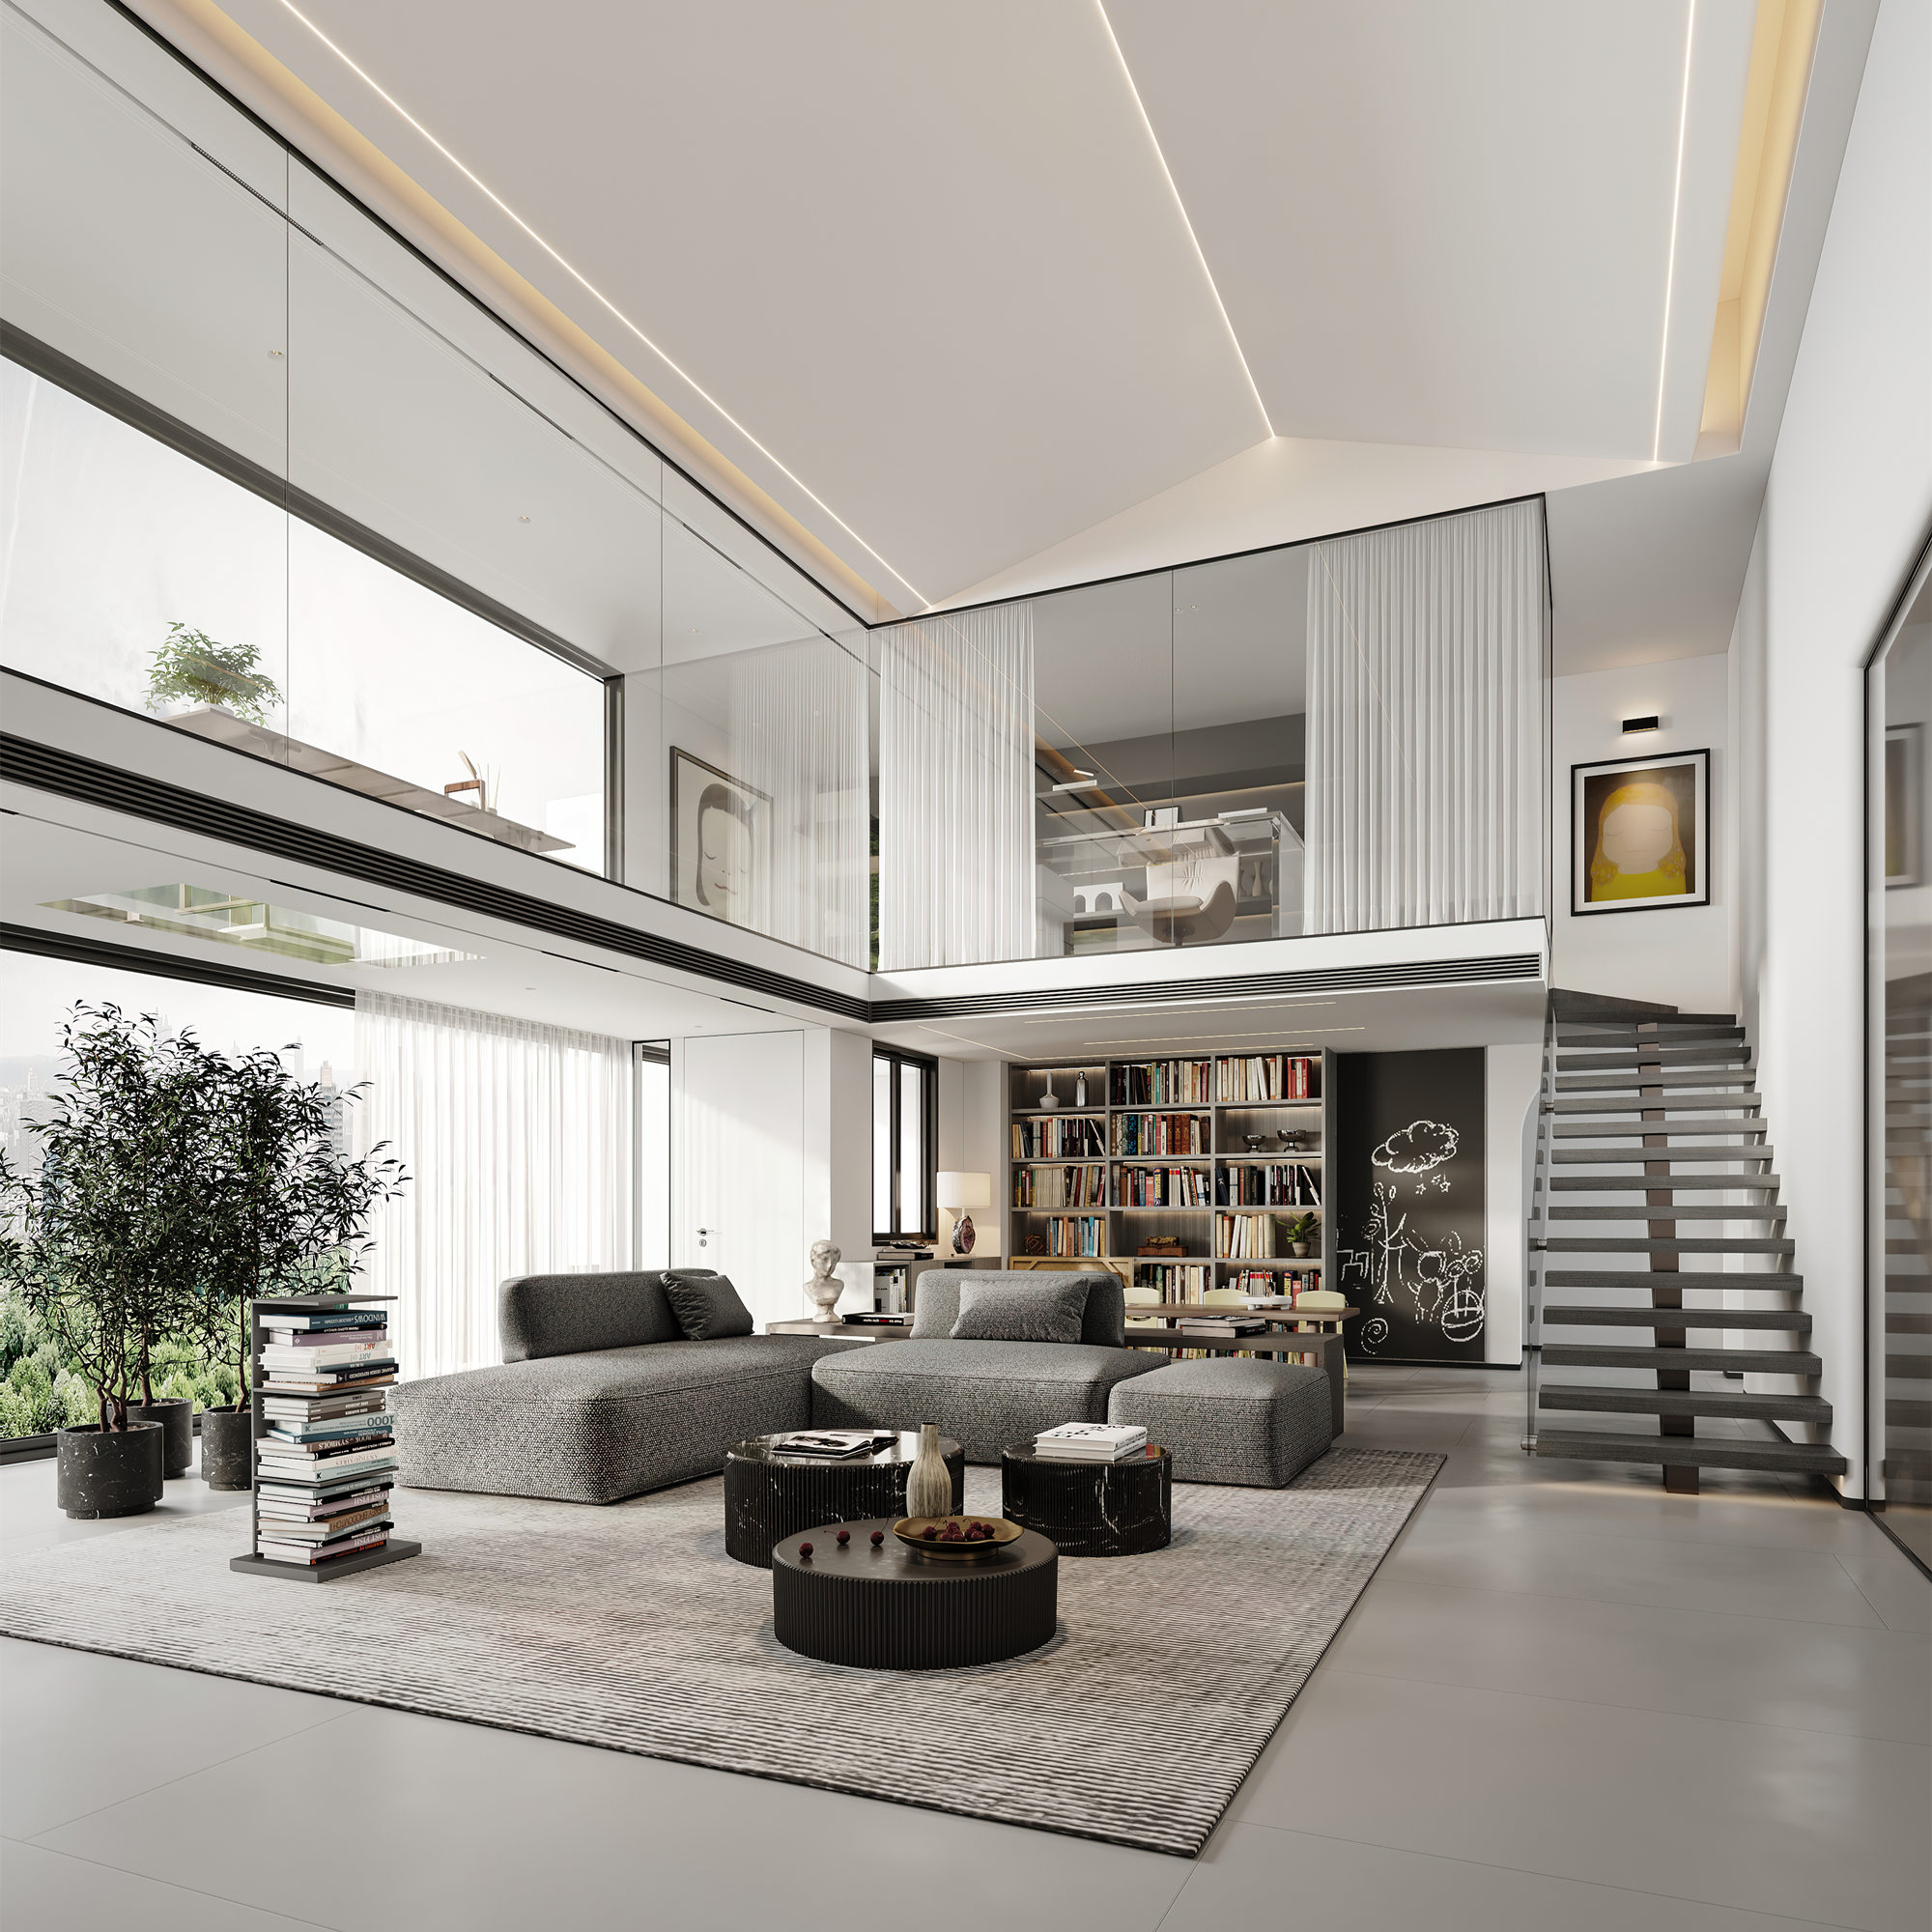 architectural-visualization-3d-rendering-services-interior-cgi-grand-waterfront-zhongshan-living-room